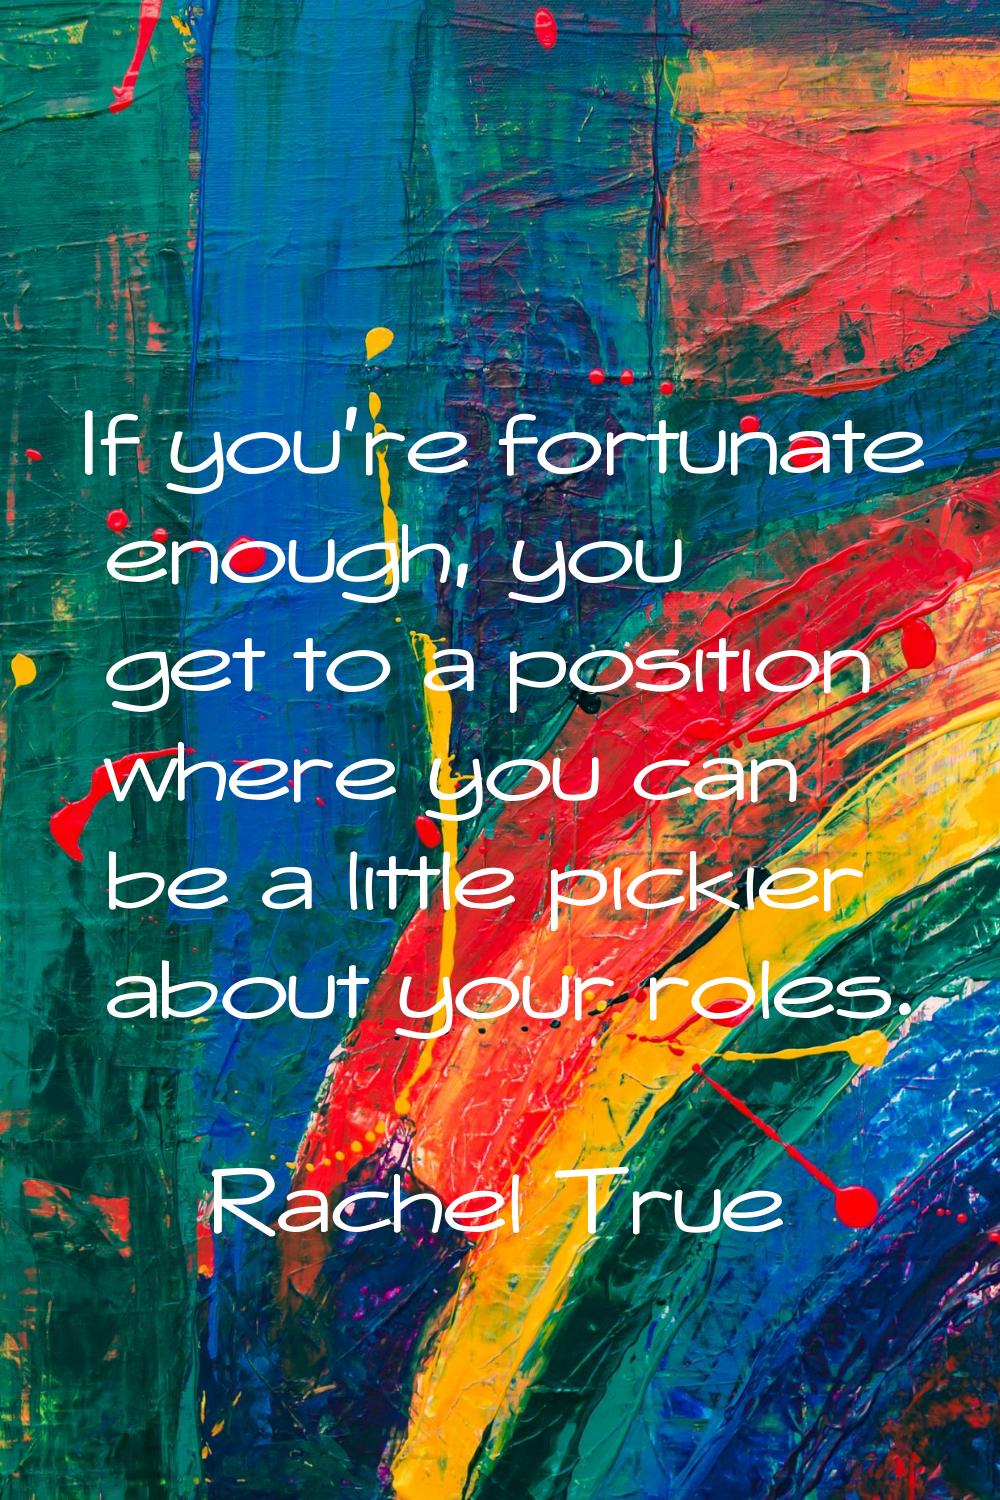 If you're fortunate enough, you get to a position where you can be a little pickier about your role